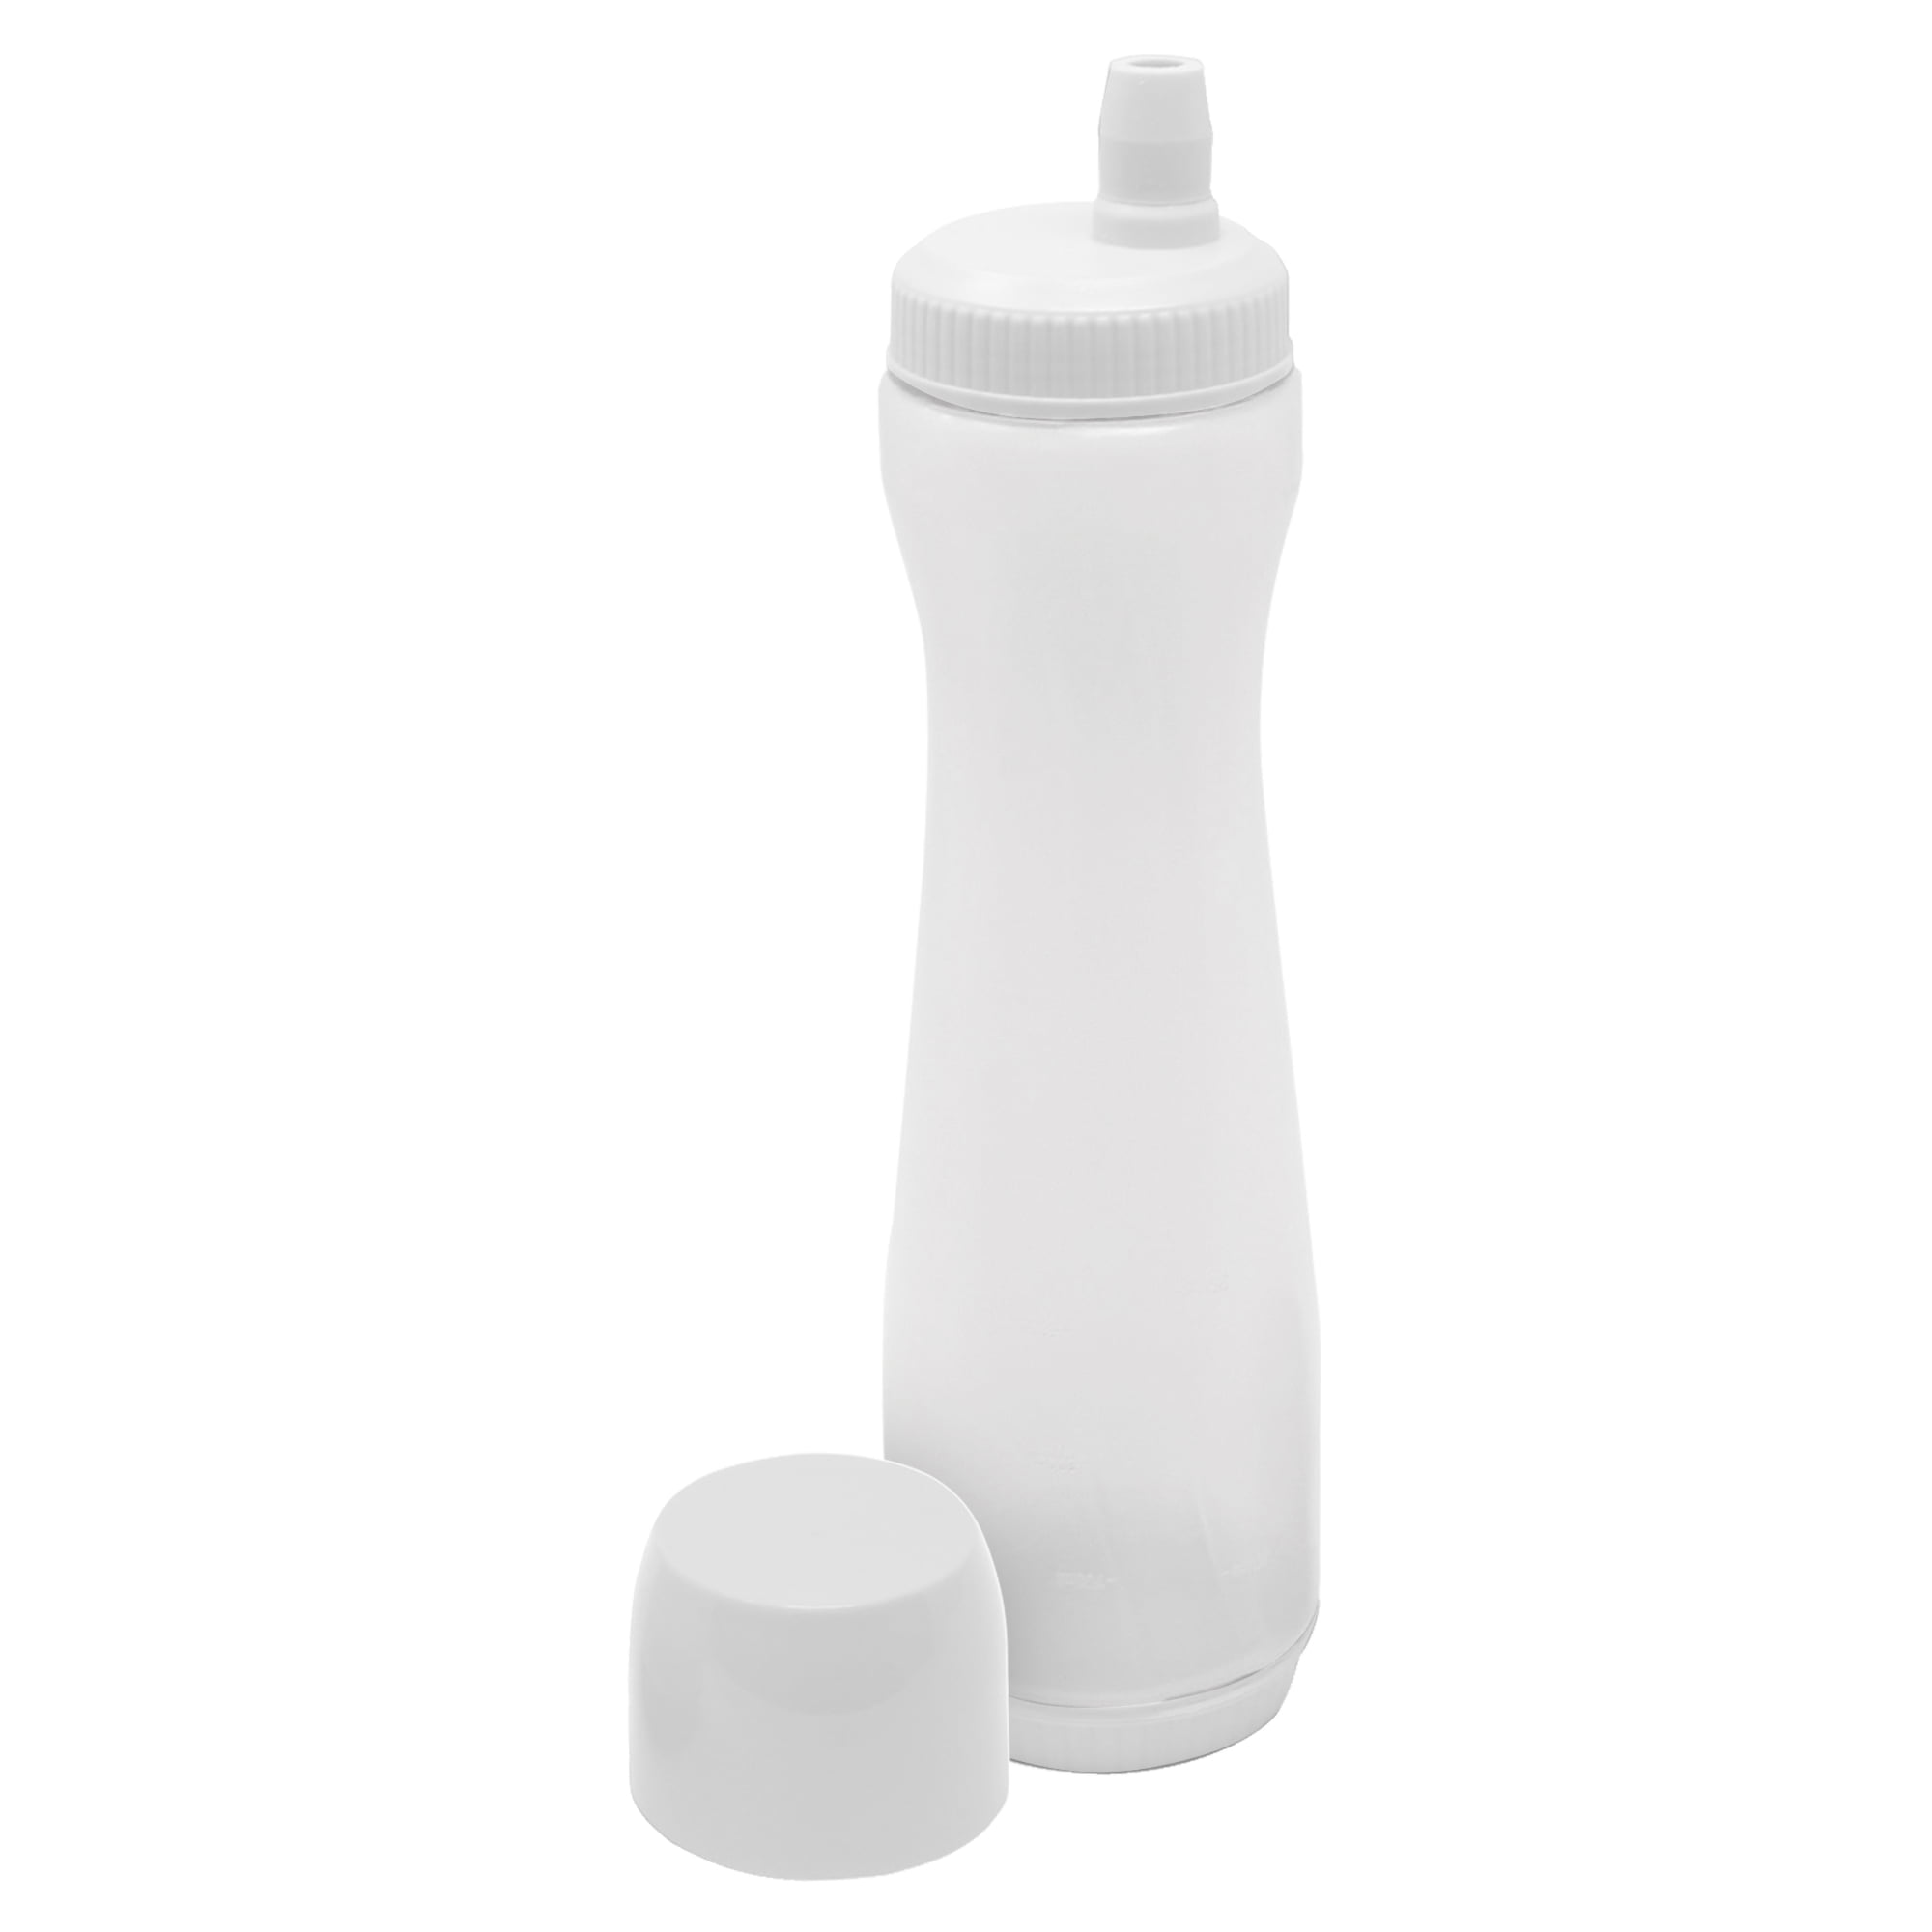 Tovolo Flow Pen 2.0 with Removable Cap 3-Cup Capacity Dispenser, Easy-Squeeze Batter Bottle for Pancake Art, Cayenne